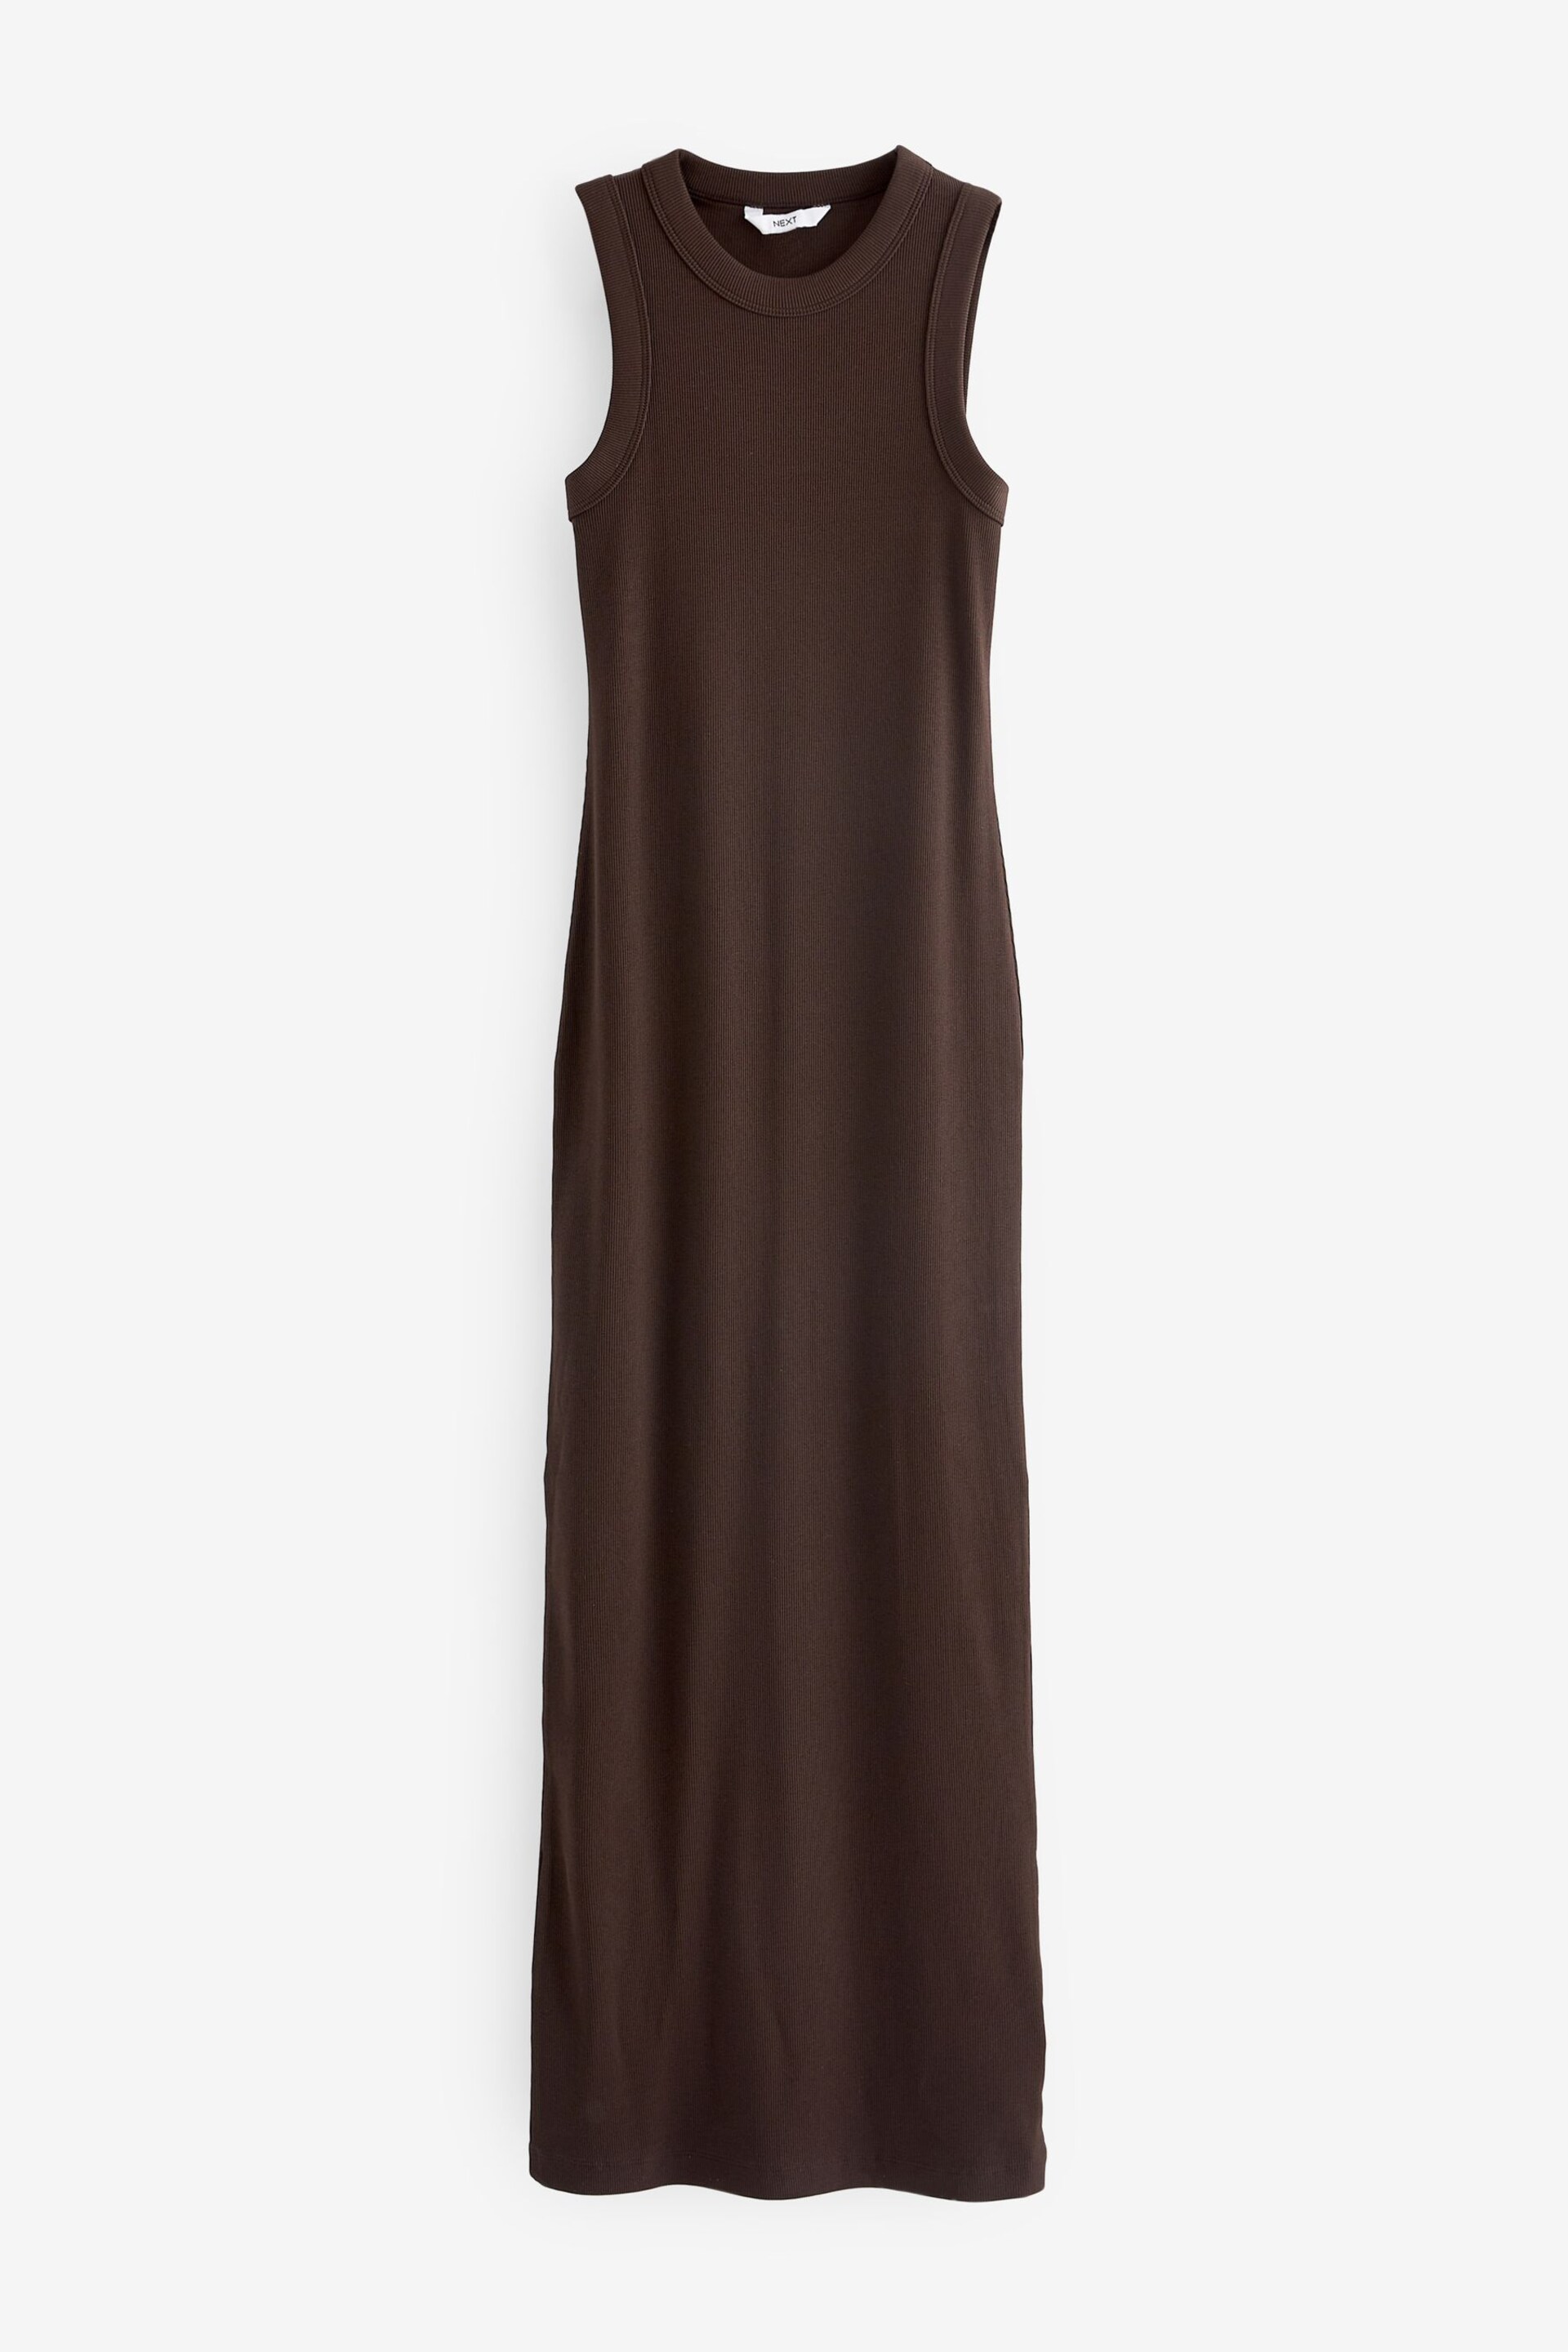 Chocolate Brown Sleeveless Racer Neck Ribbed Maxi Dress - Image 4 of 5